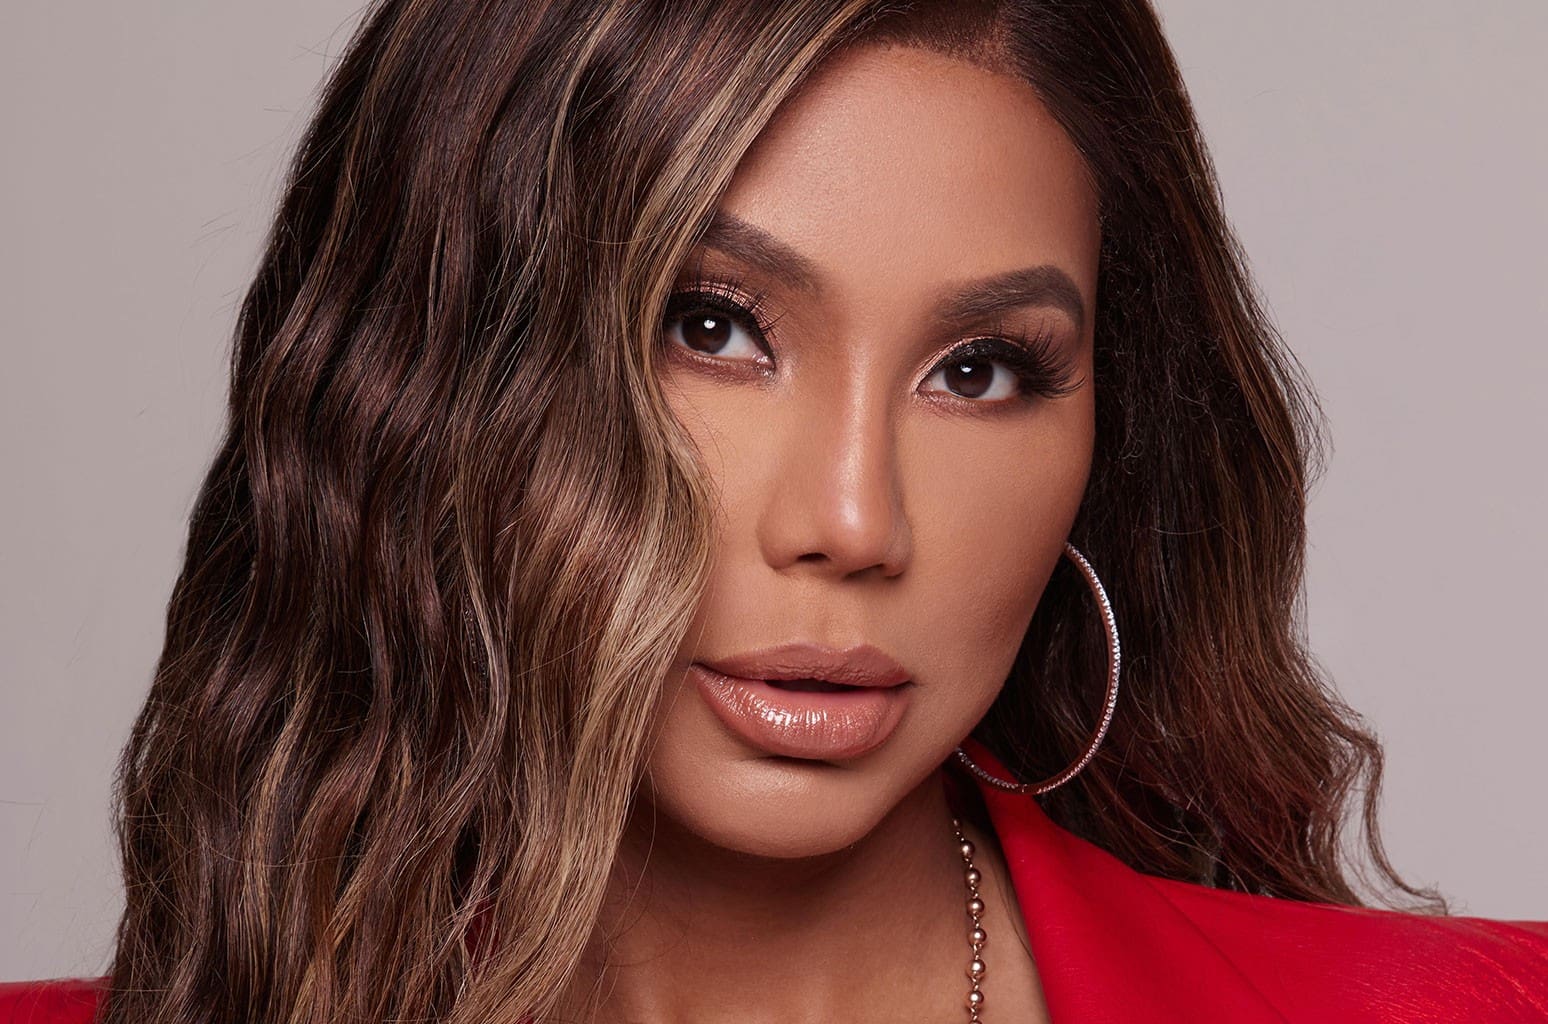 ”tamar-braxton-tells-fans-that-reality-tv-almost-killed-her”